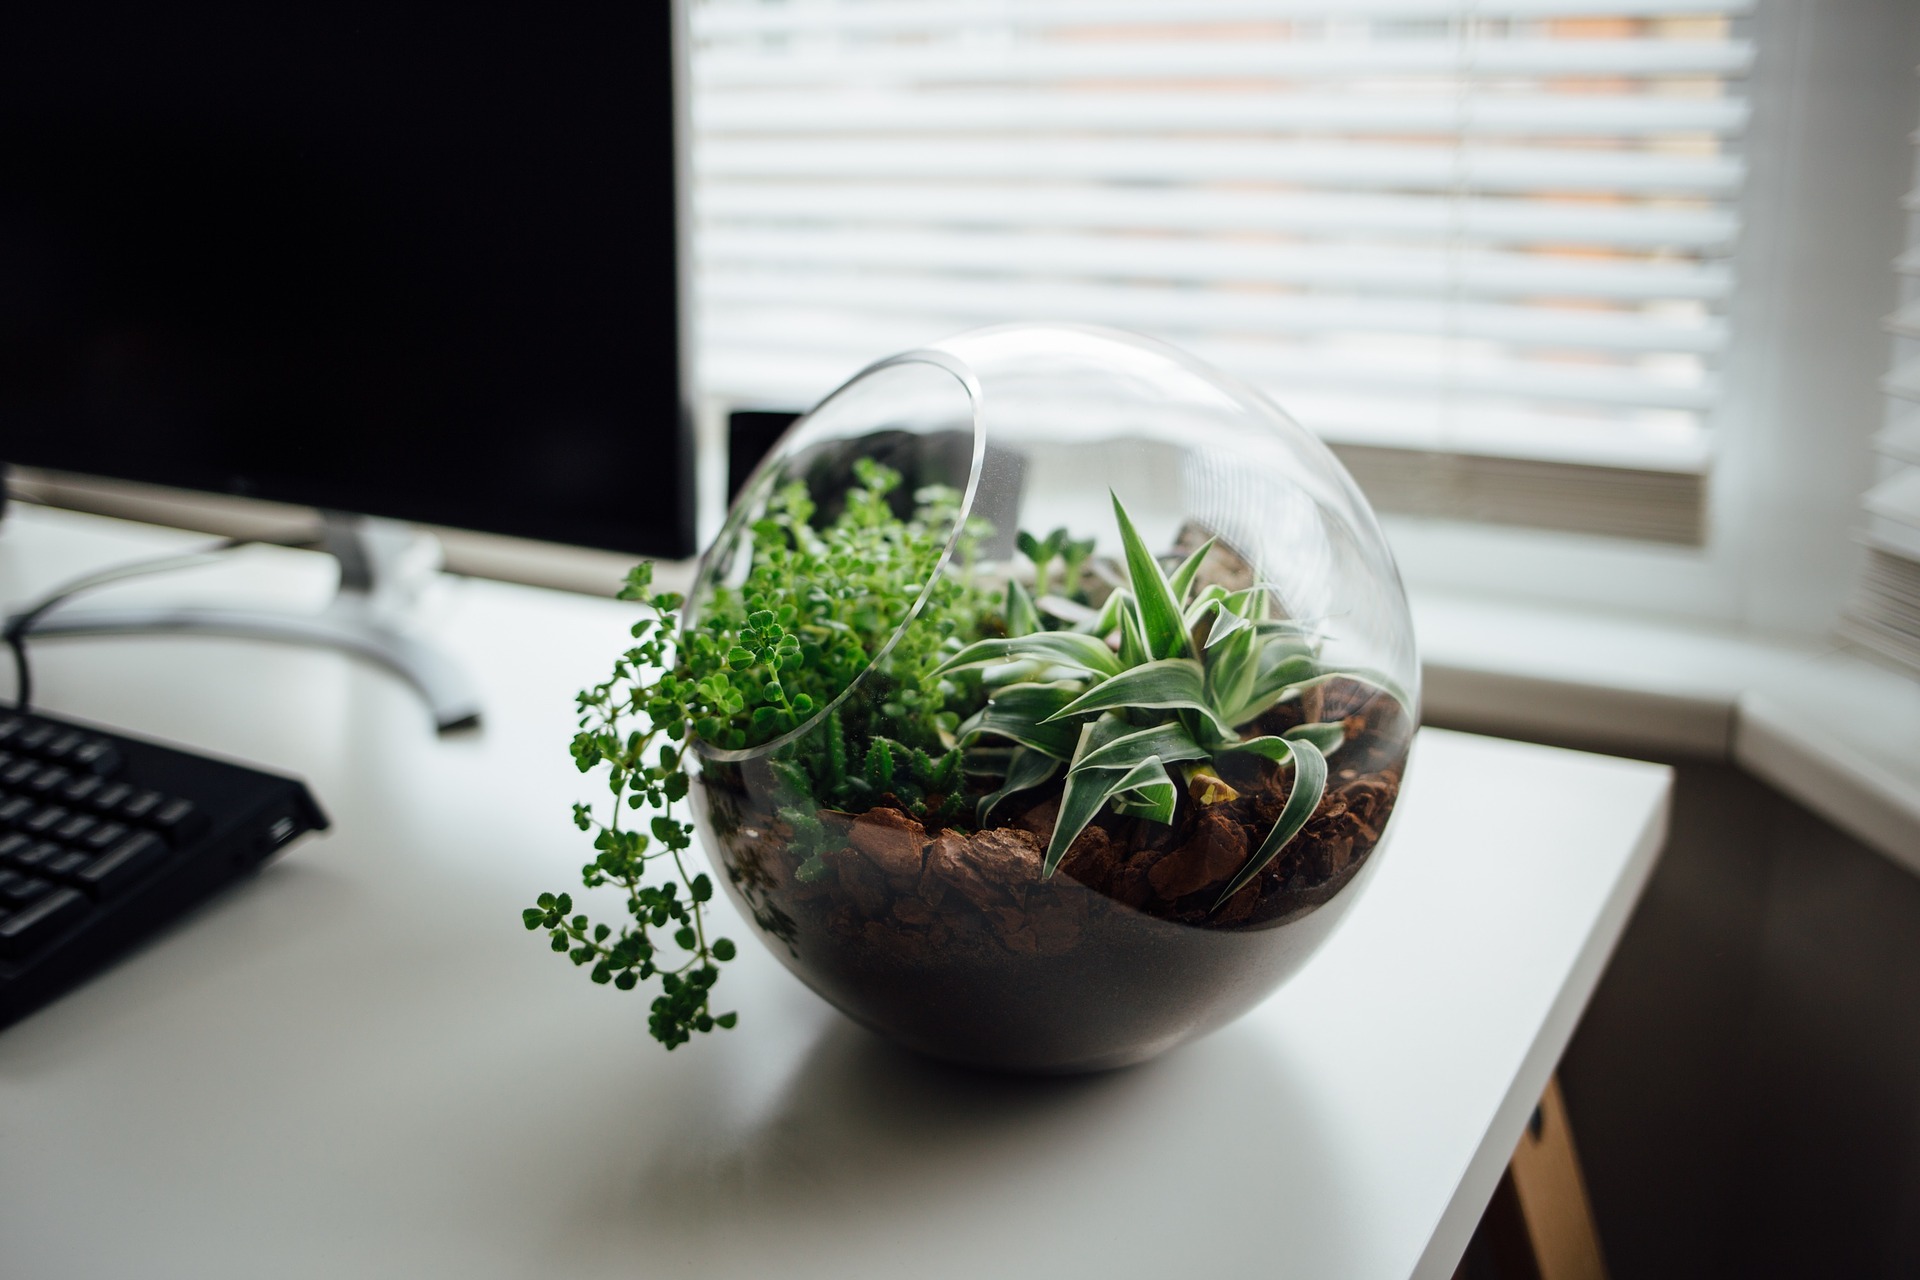 Humble office plants like this desk terrarium can make you more productive and healthier at work. Photo: Stocksnap/Creative Commons